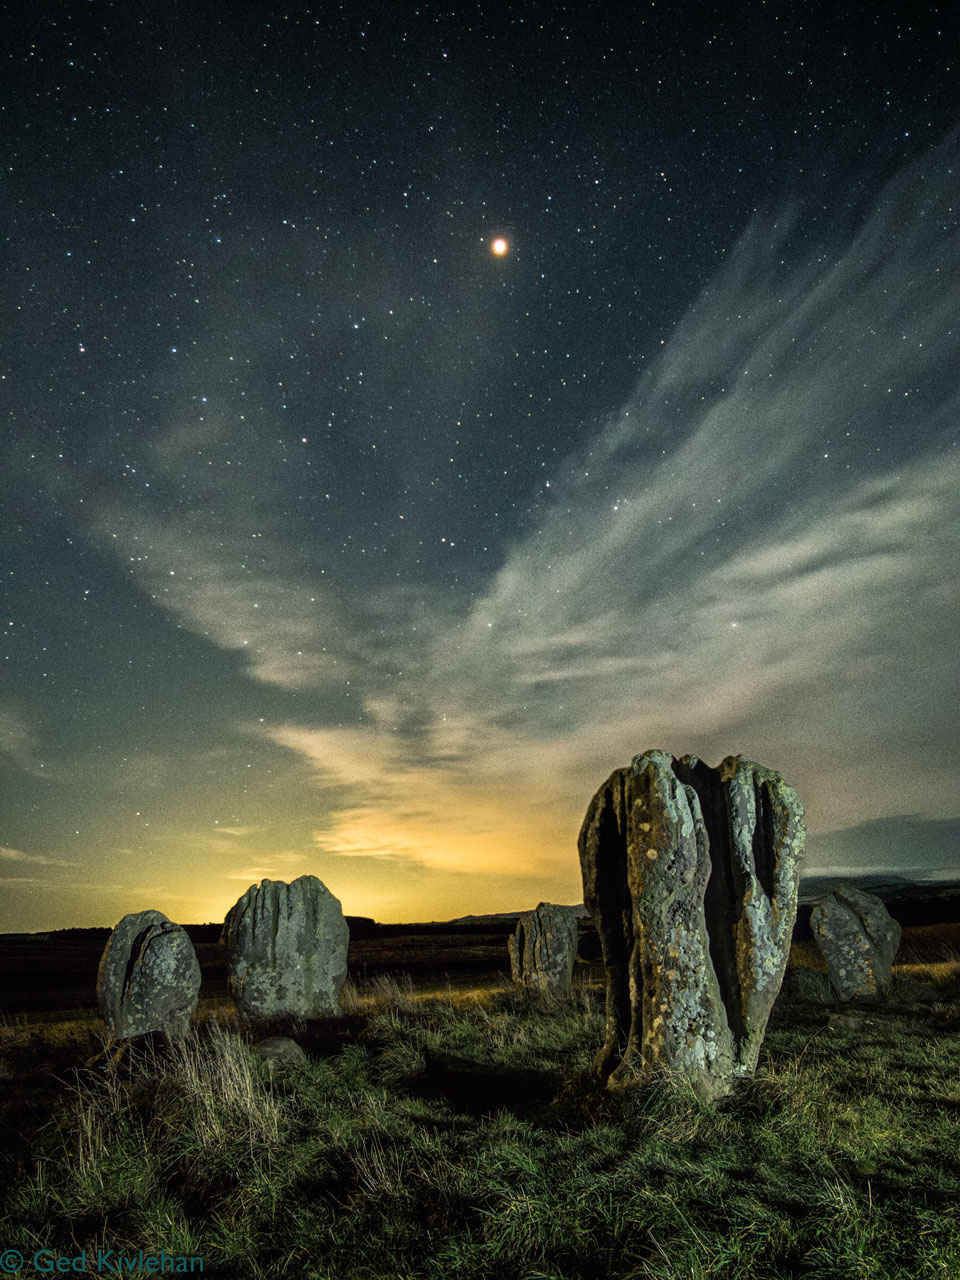 The planet Mars is pictured of the Duddo Stone Circle in the UK. See Explanation.